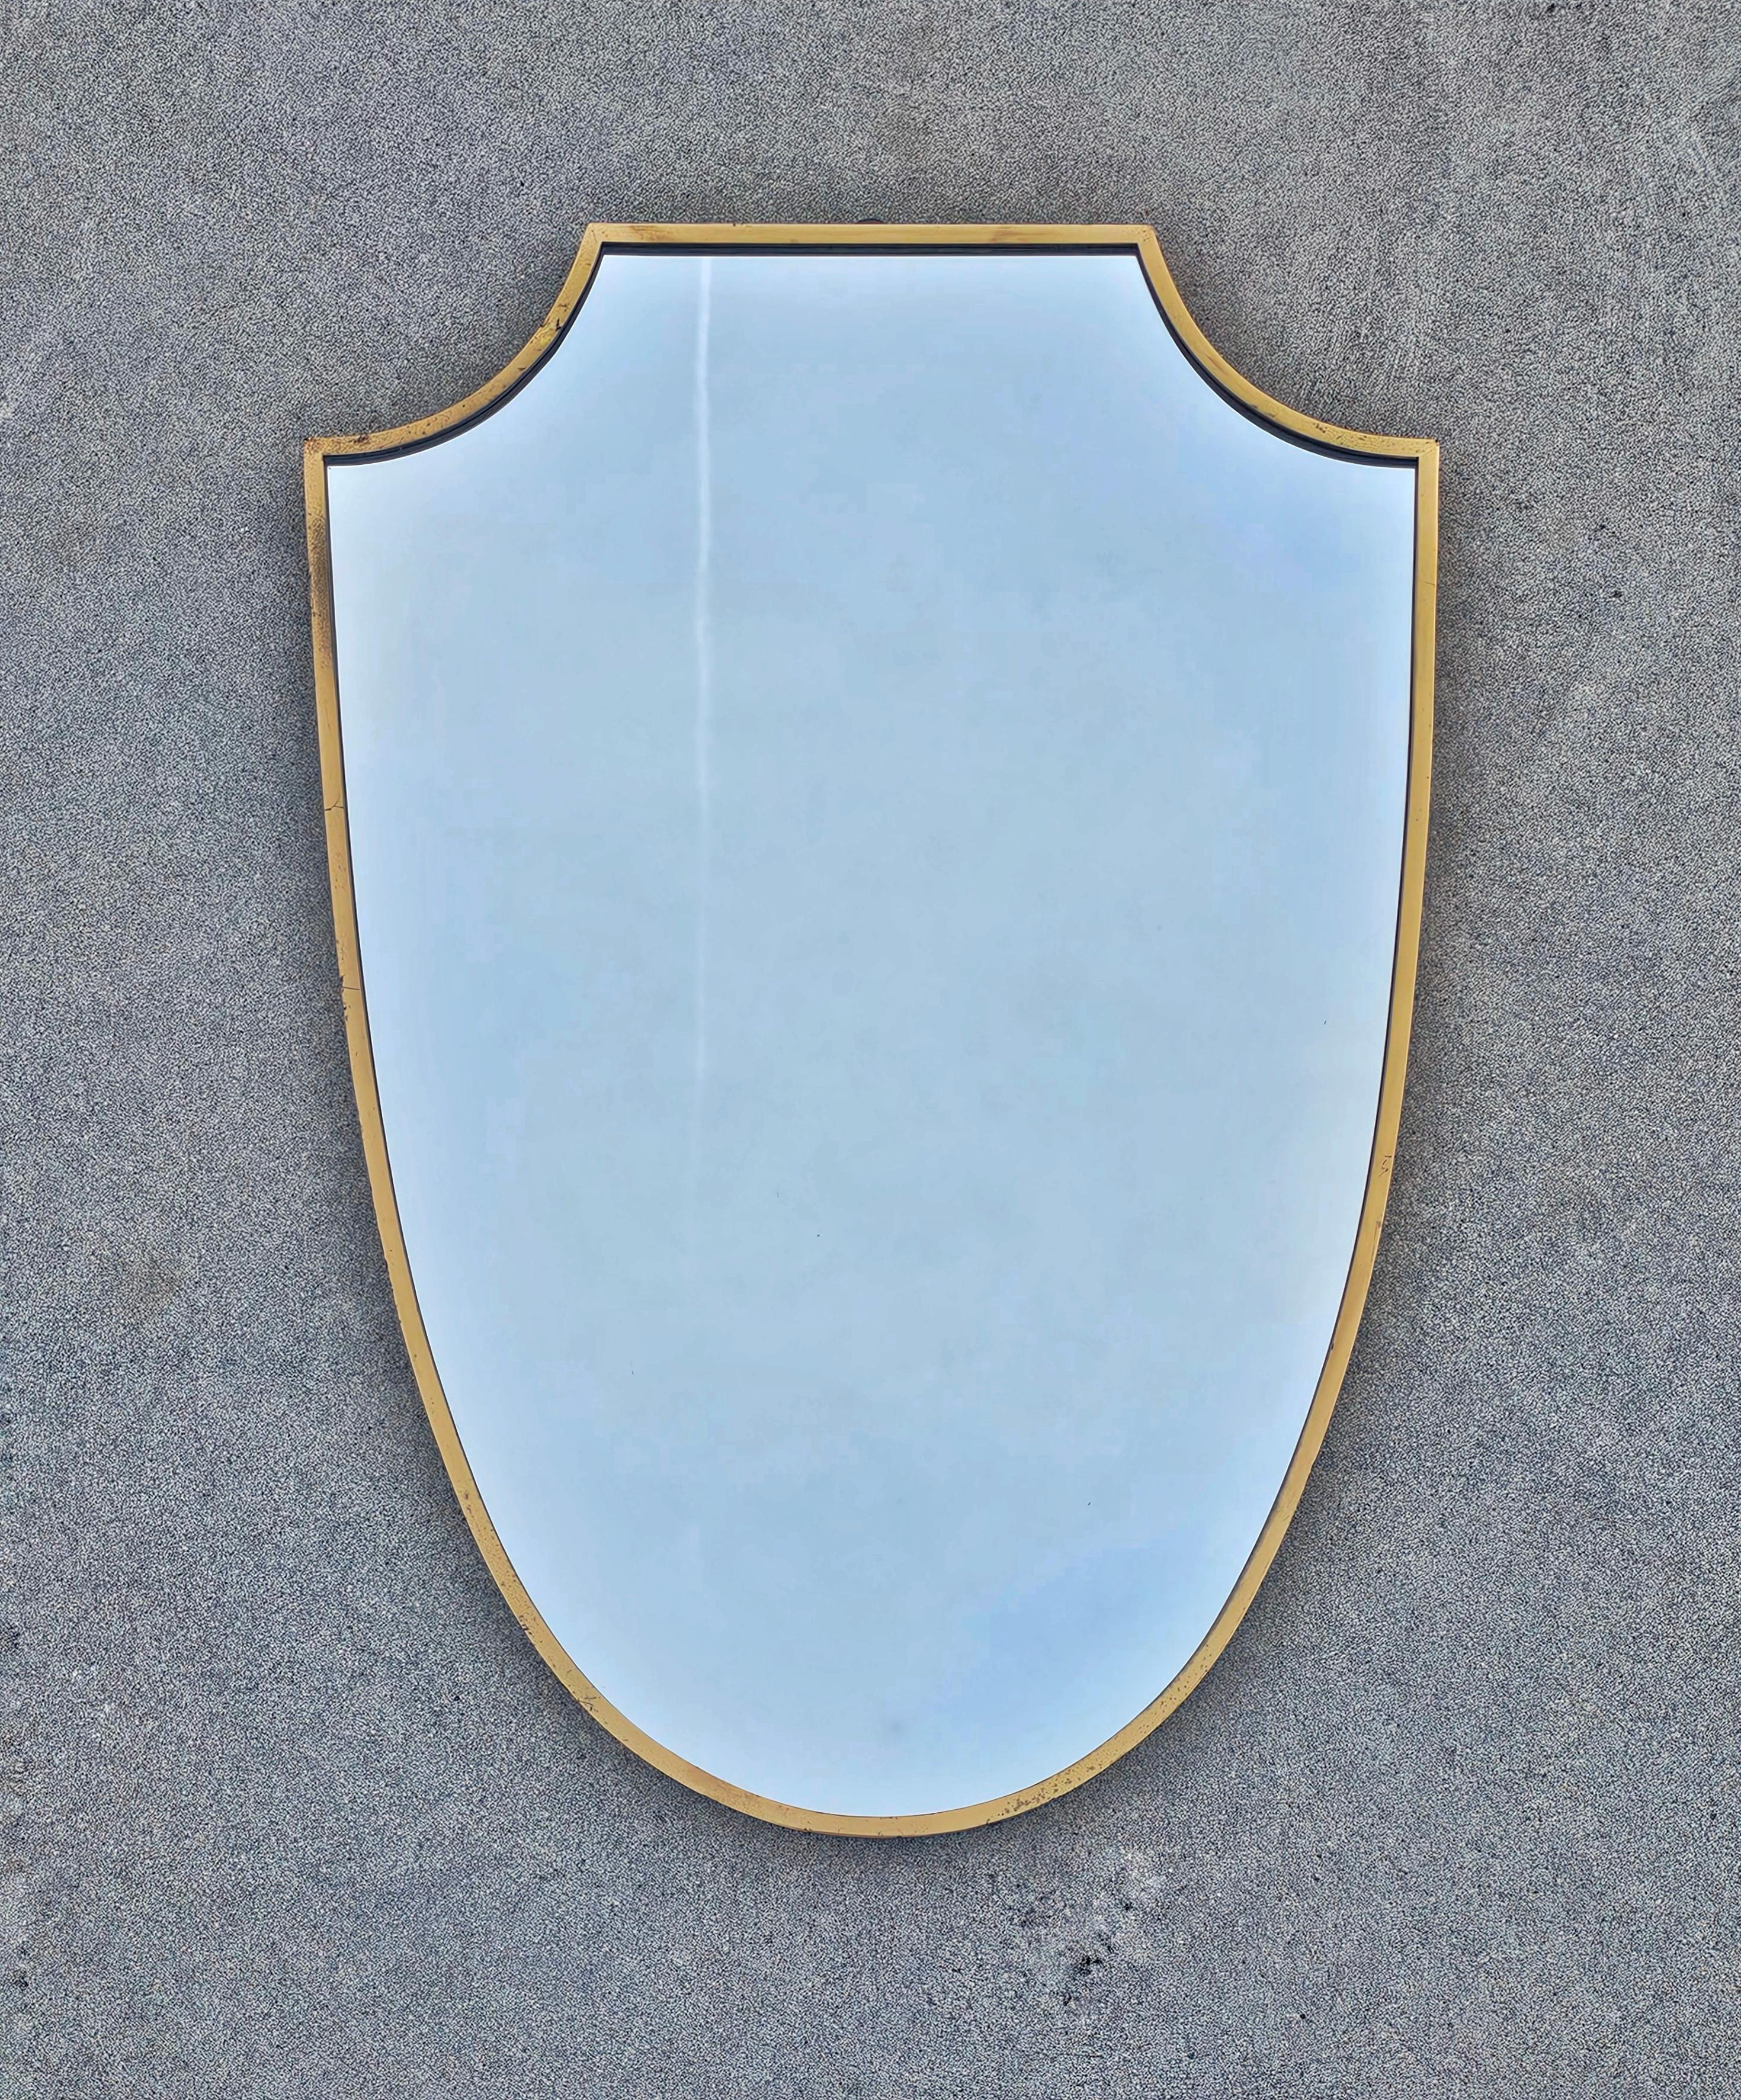 In this listing you will find a striking shield-shaped Mid Century Modern 
wall mirror in brass frame. Large format and gorgeous shape make this mirror a hard to find piece. On the back of the mirror you can still see the stamp saying 